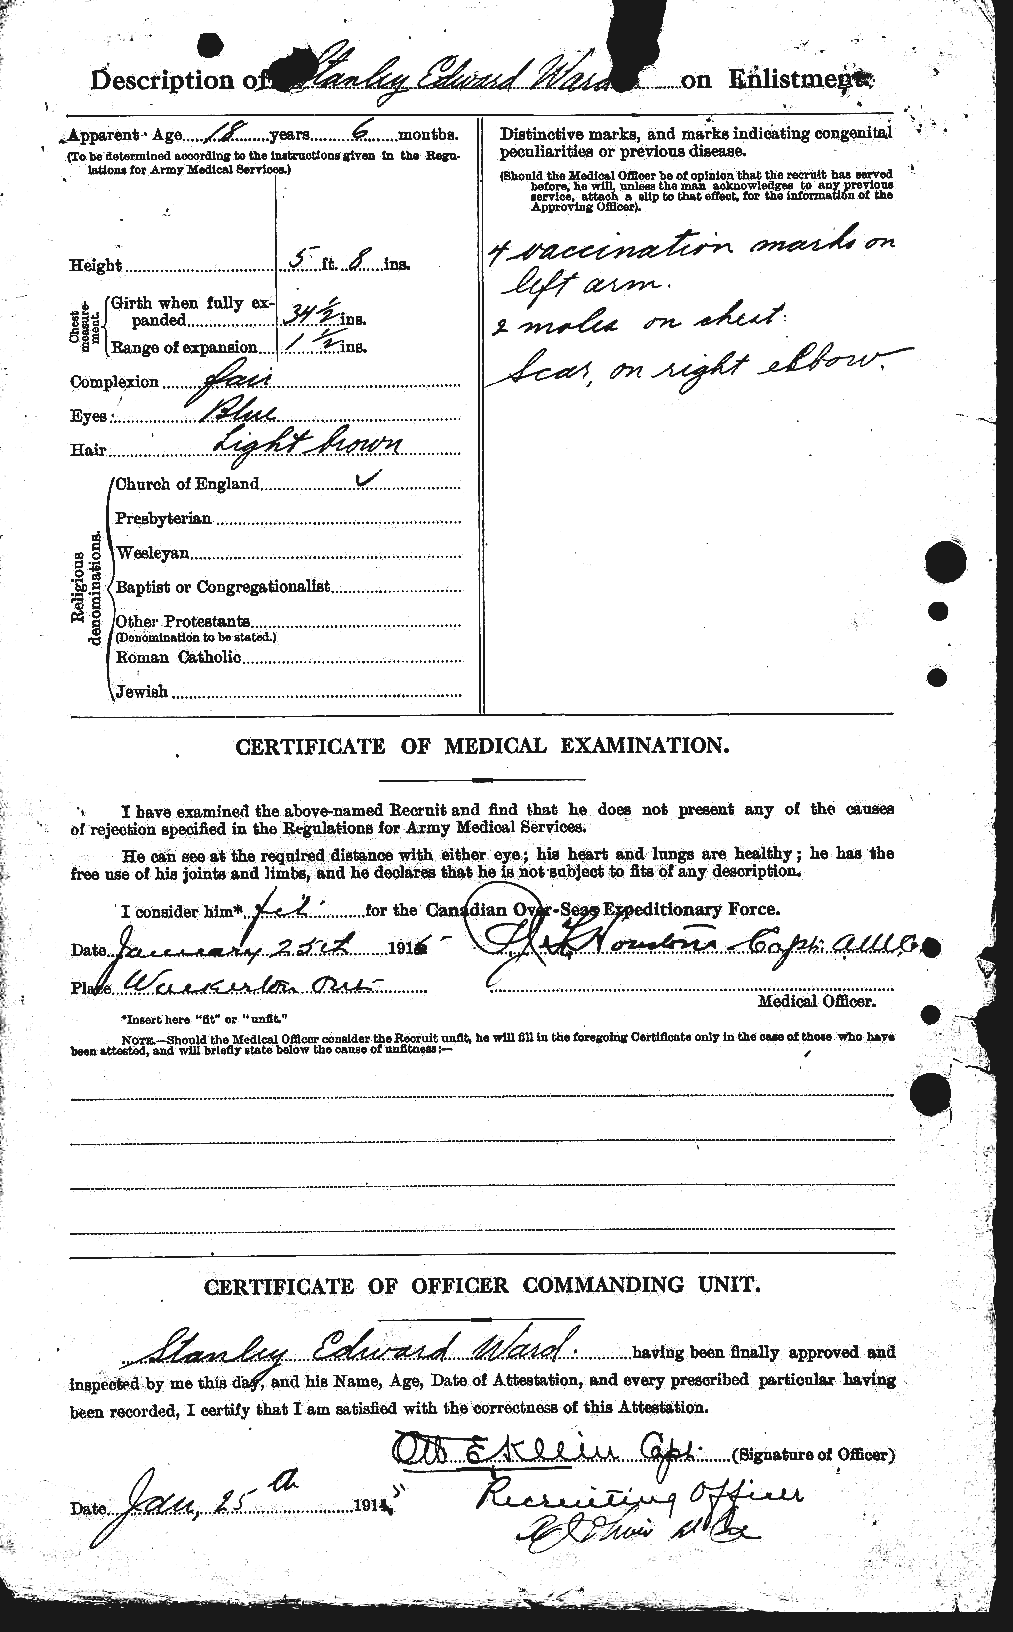 Personnel Records of the First World War - CEF 659694b